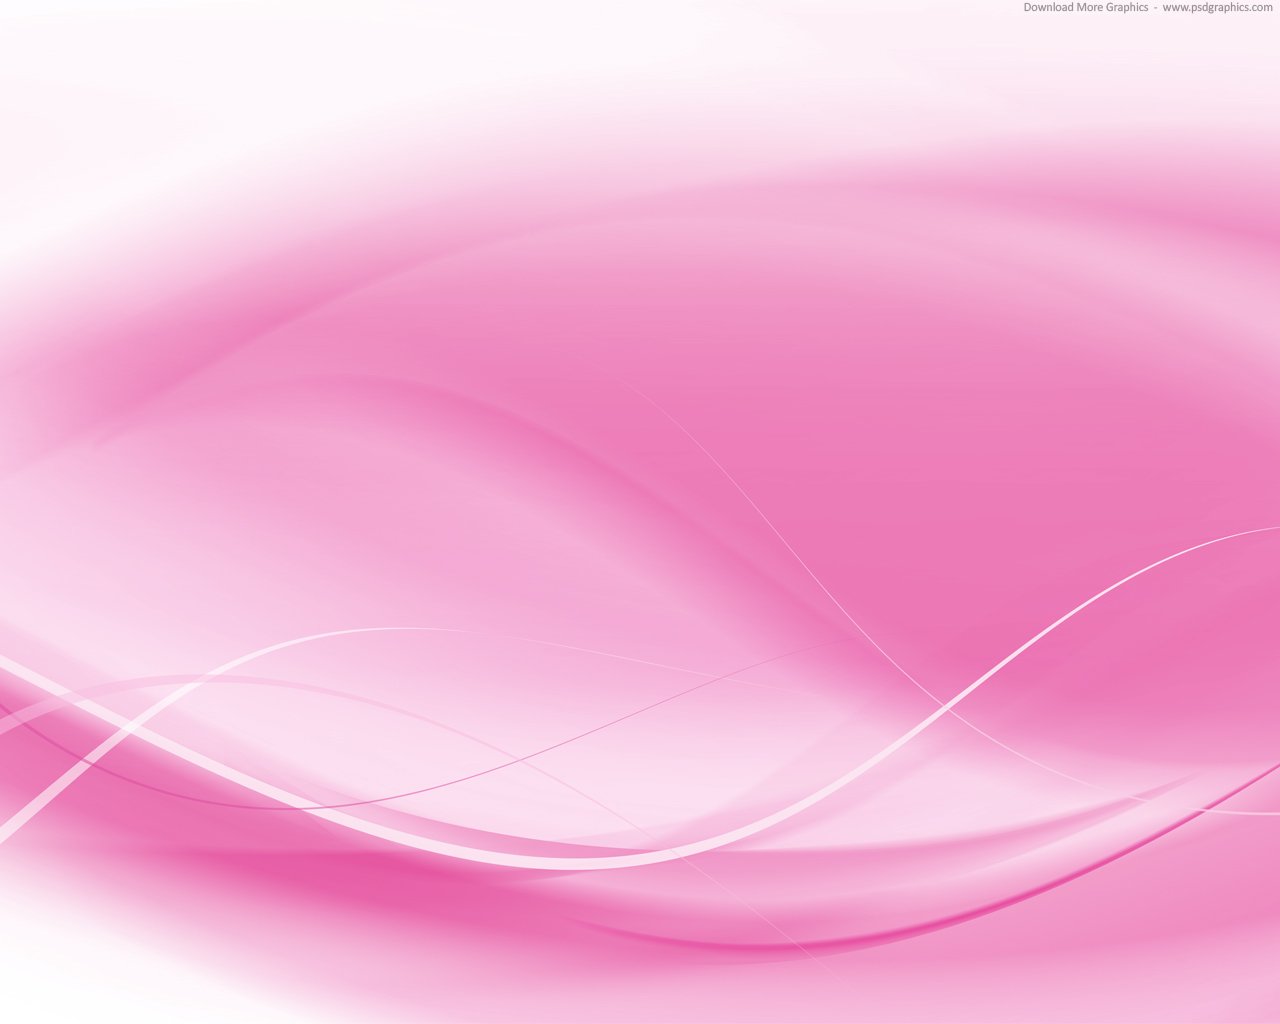 Medium size preview 1280x1024px Soft pink background 1280x1024